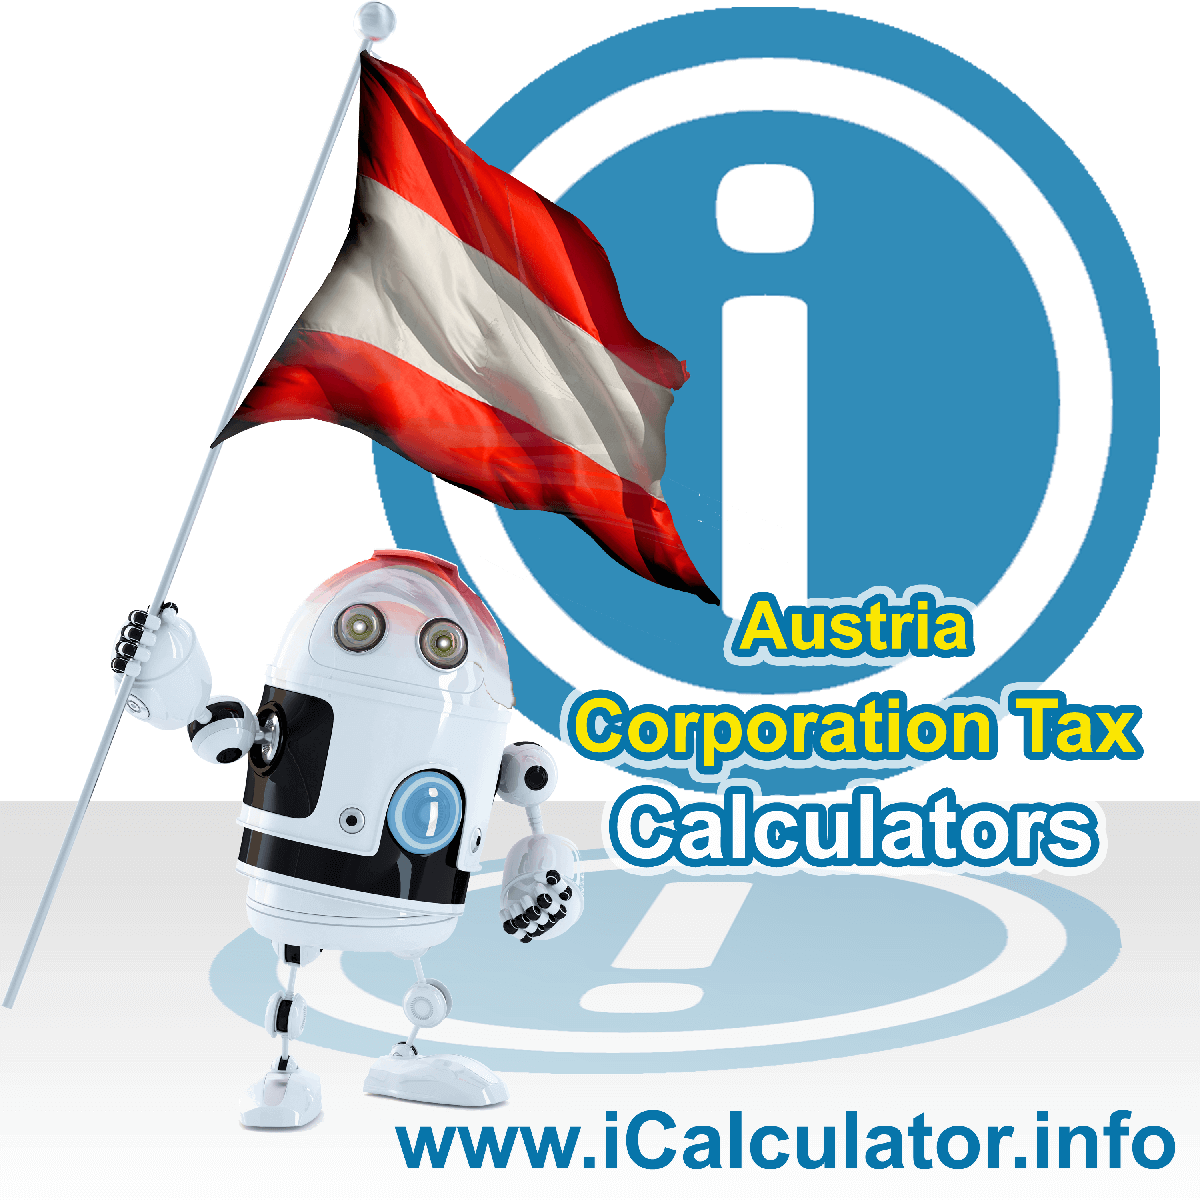 Austria Corporation Tax Calculator. This image shows the Austria flag and information relating to the corporation tax rate formula used for calculating Corporation Tax in Austria using the Austria Corporation Tax Calculator in 2022